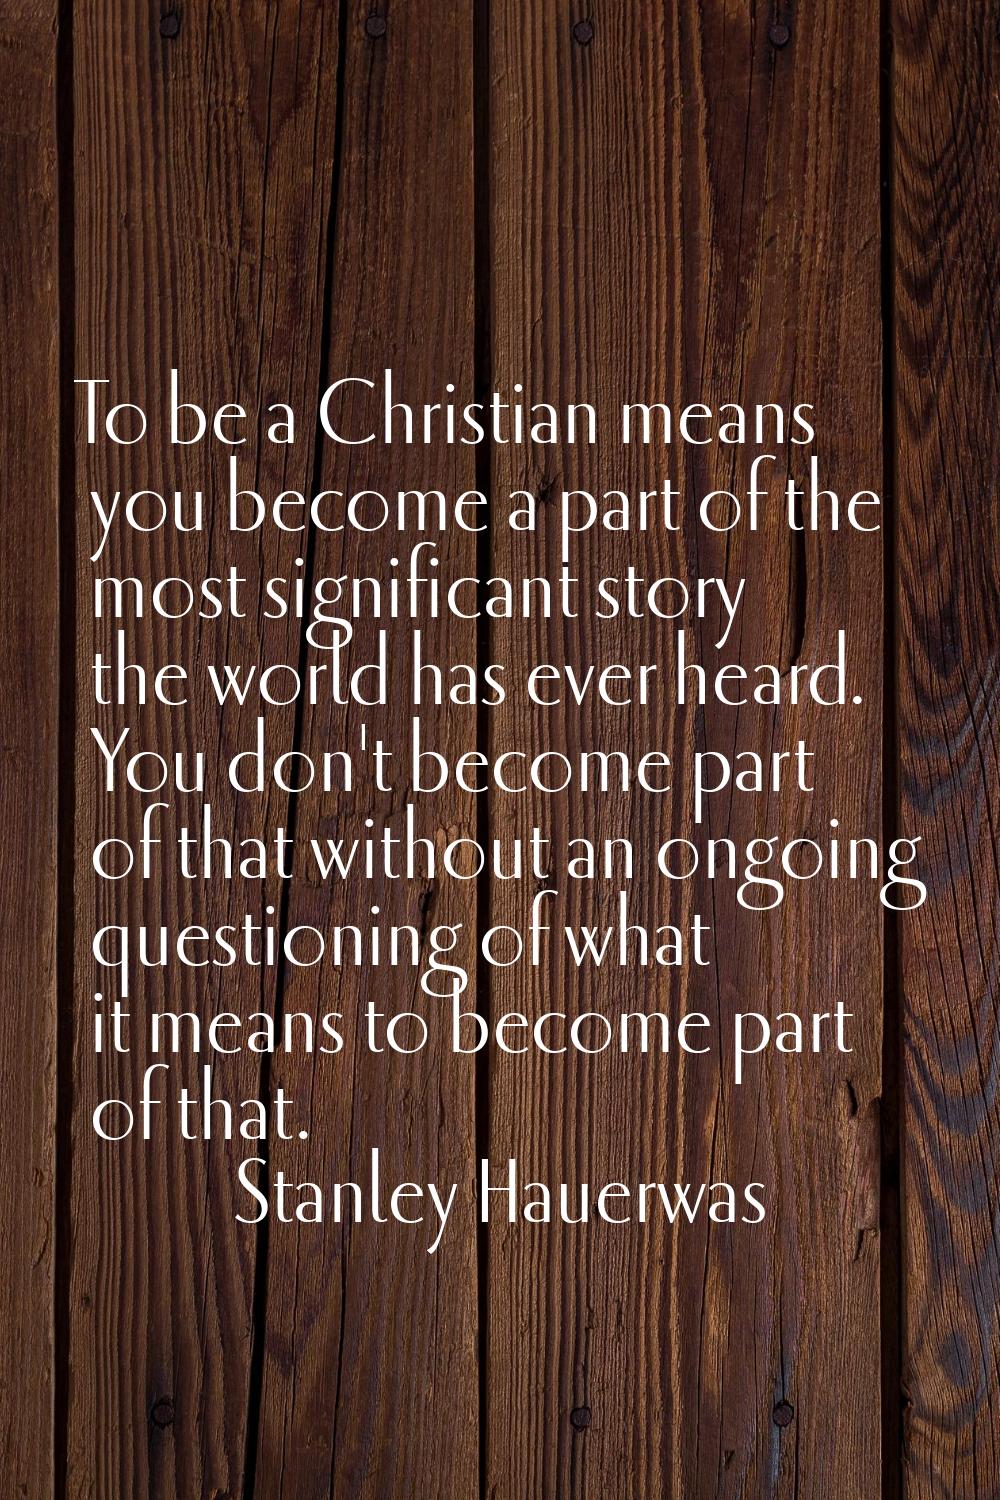 To be a Christian means you become a part of the most significant story the world has ever heard. Y